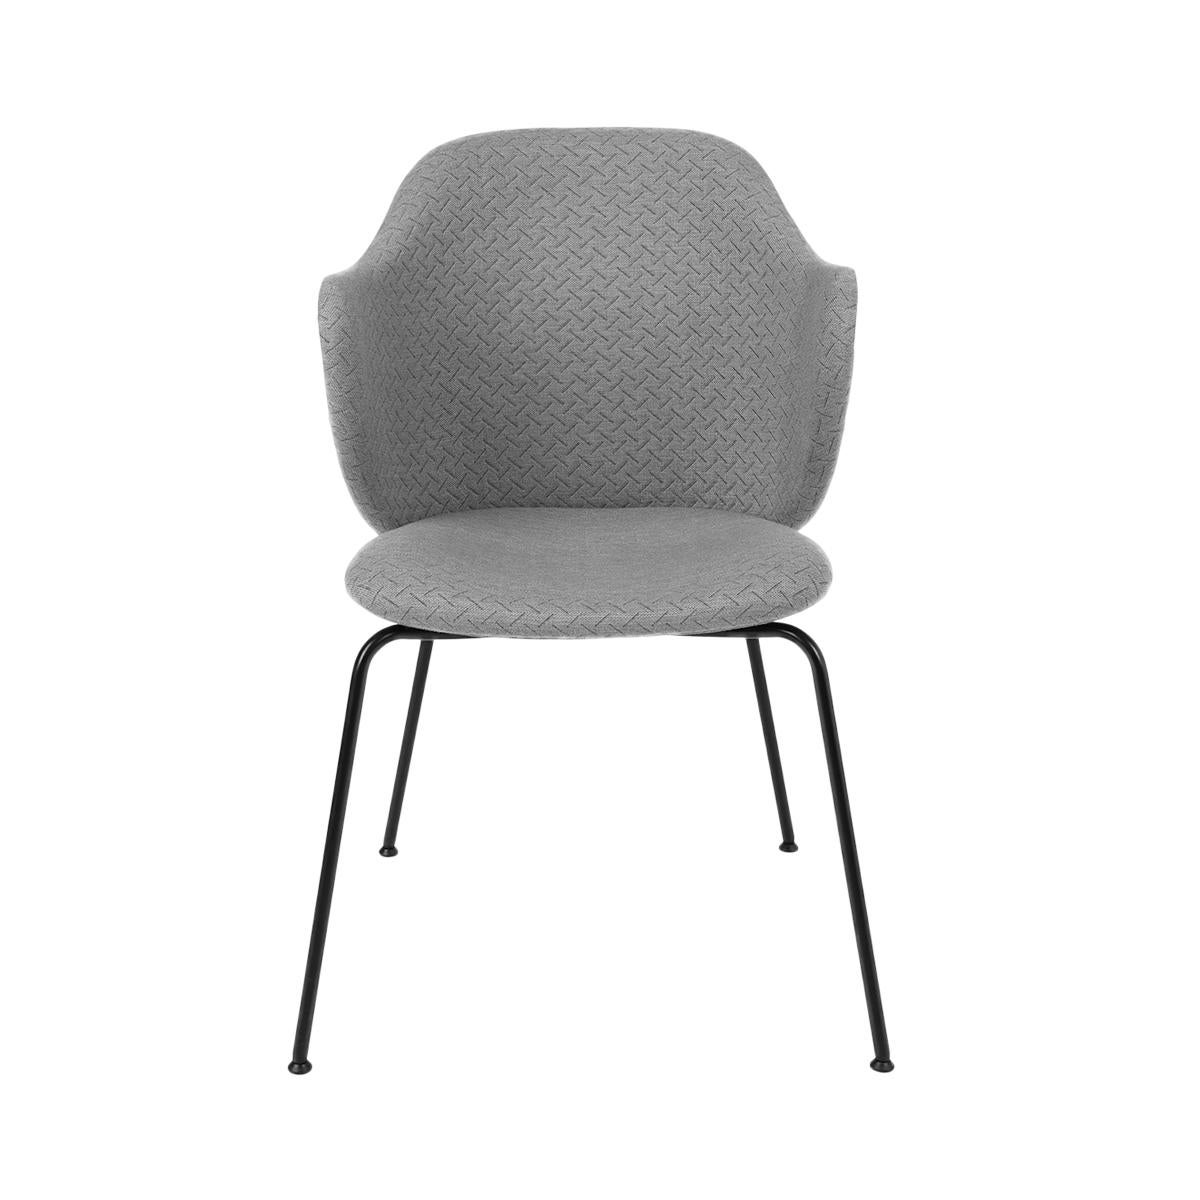 Grey Jupiter Lassen Chair by Lassen.
Dimensions: W 58 x D 60 x H 88 cm. 
Materials: Textile.

The Lassen Chair by Flemming Lassen, Magnus Sangild and Marianne Viktor was launched in 2018 as an ode to Flemming Lassen’s uncompromising approach and